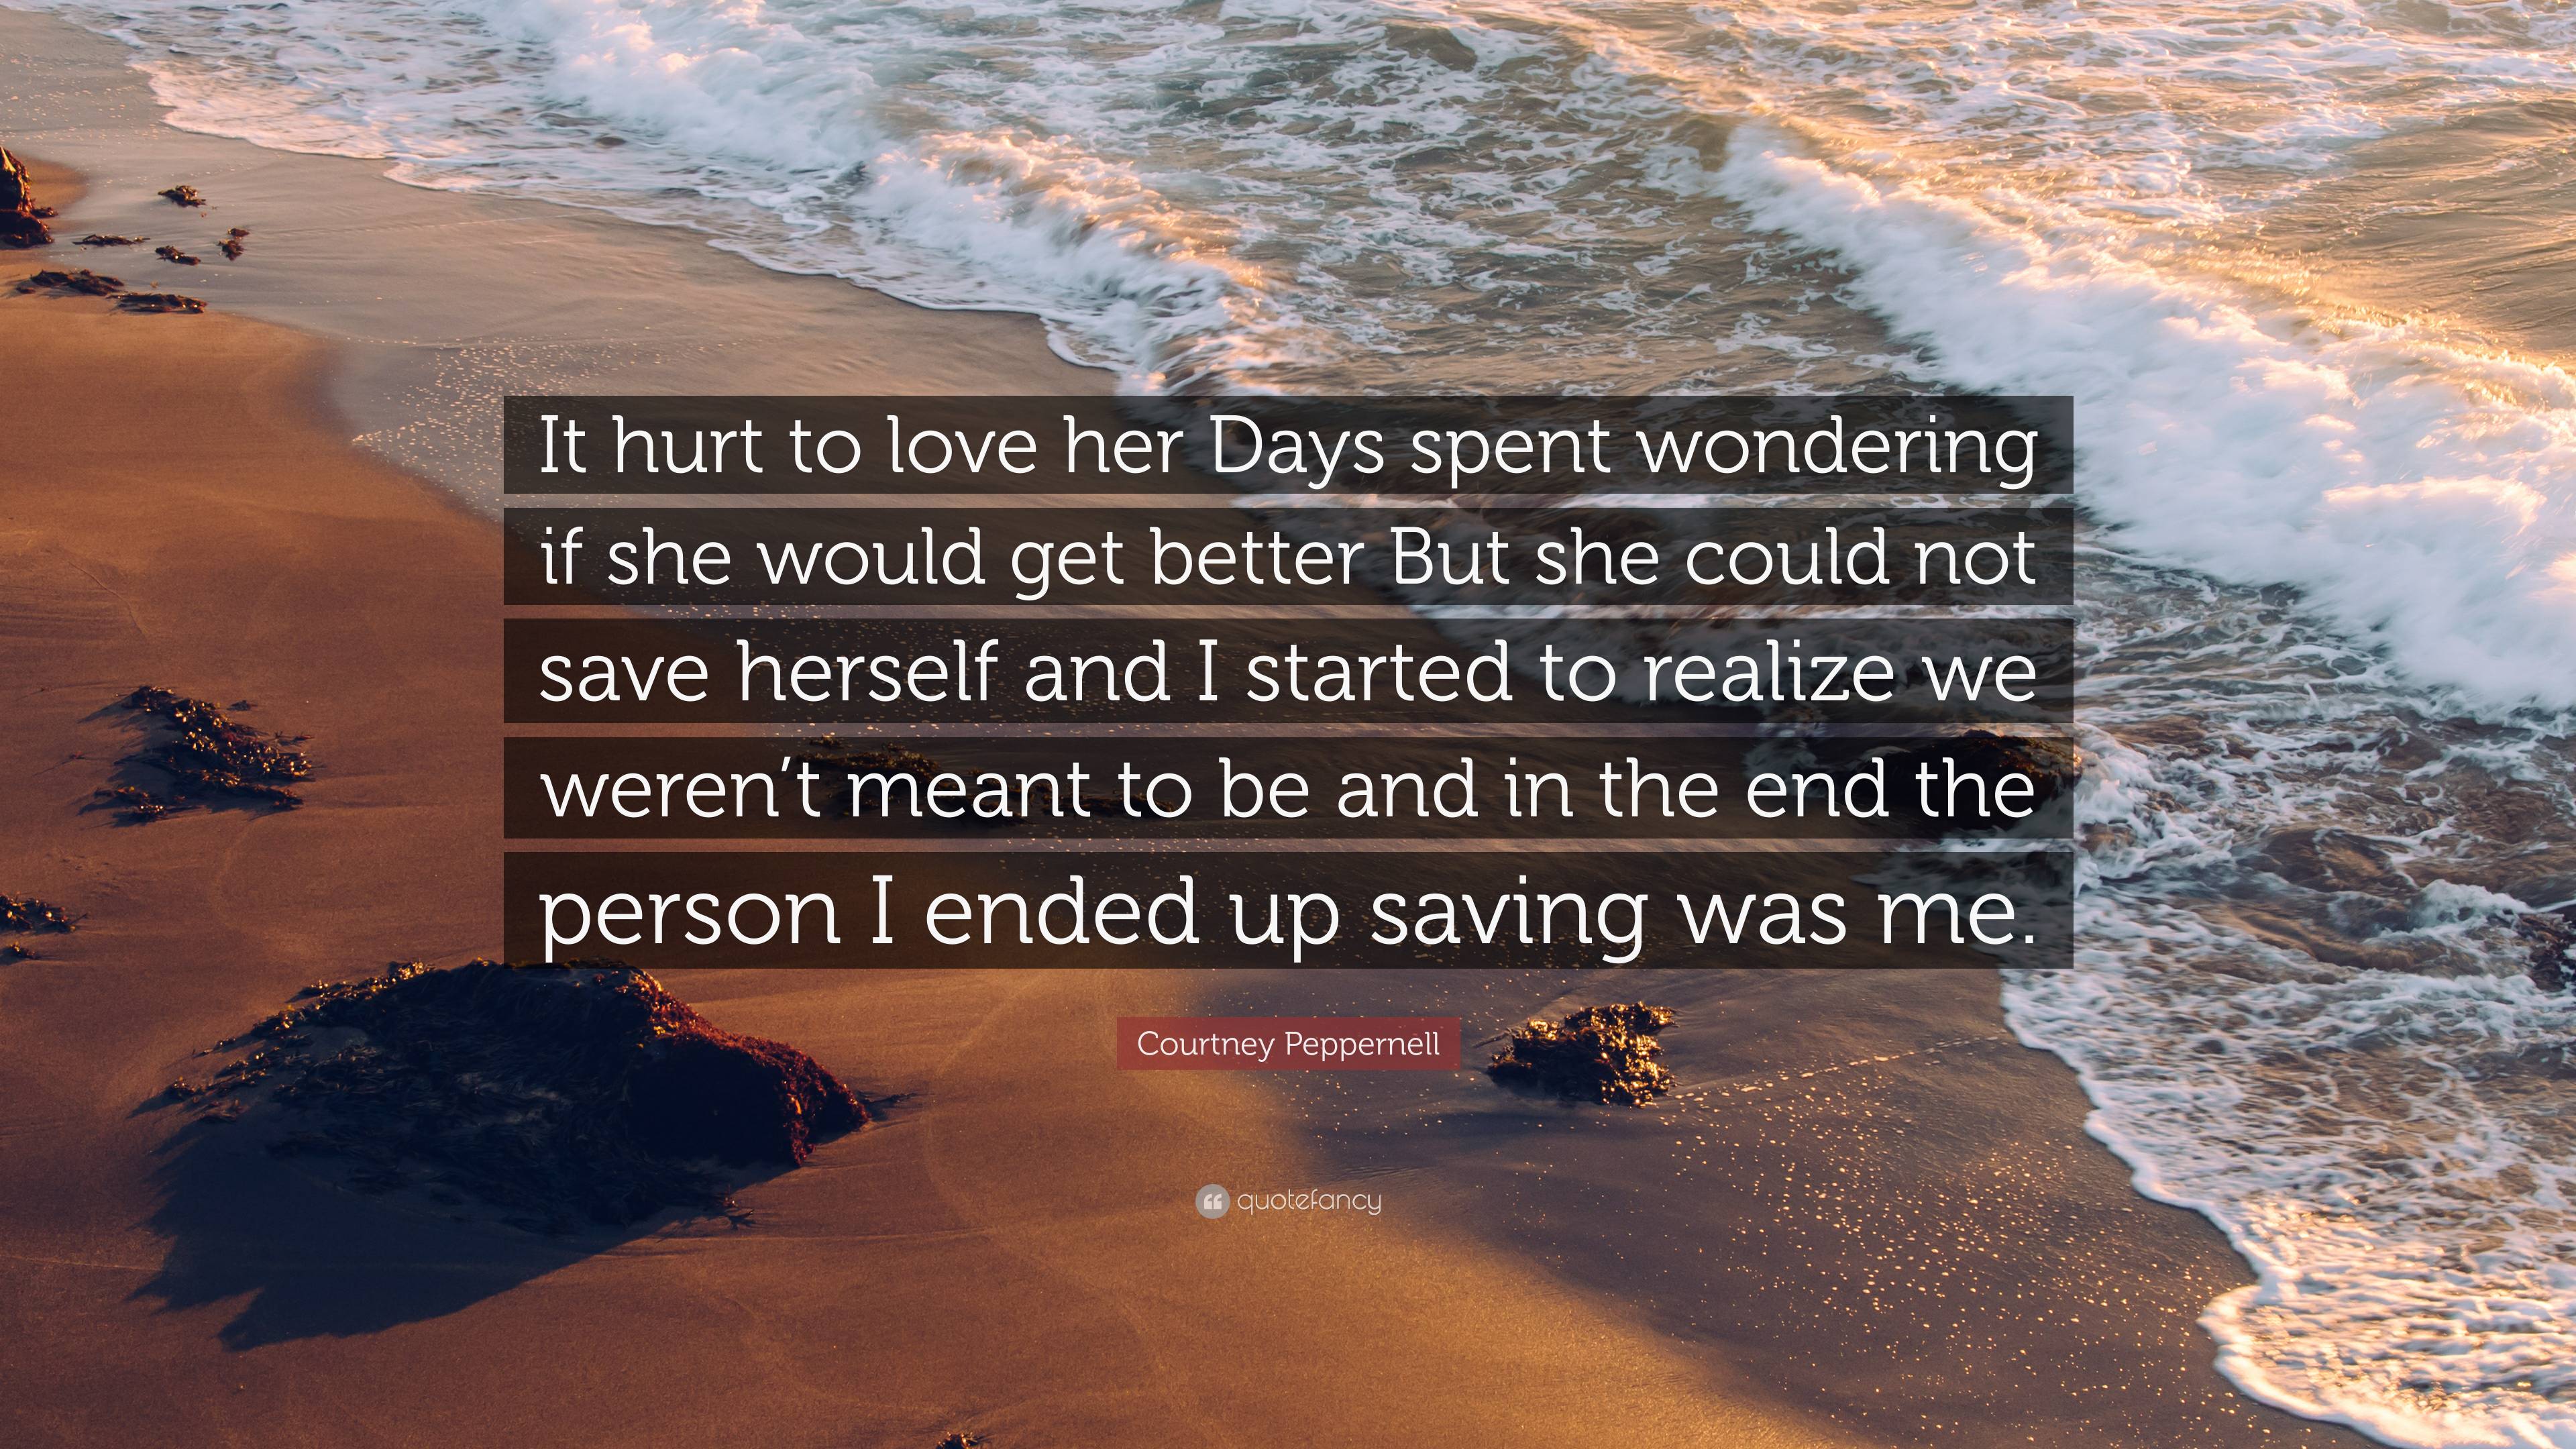 Courtney Peppernell Quote: “It hurt to love her Days spent wondering if ...